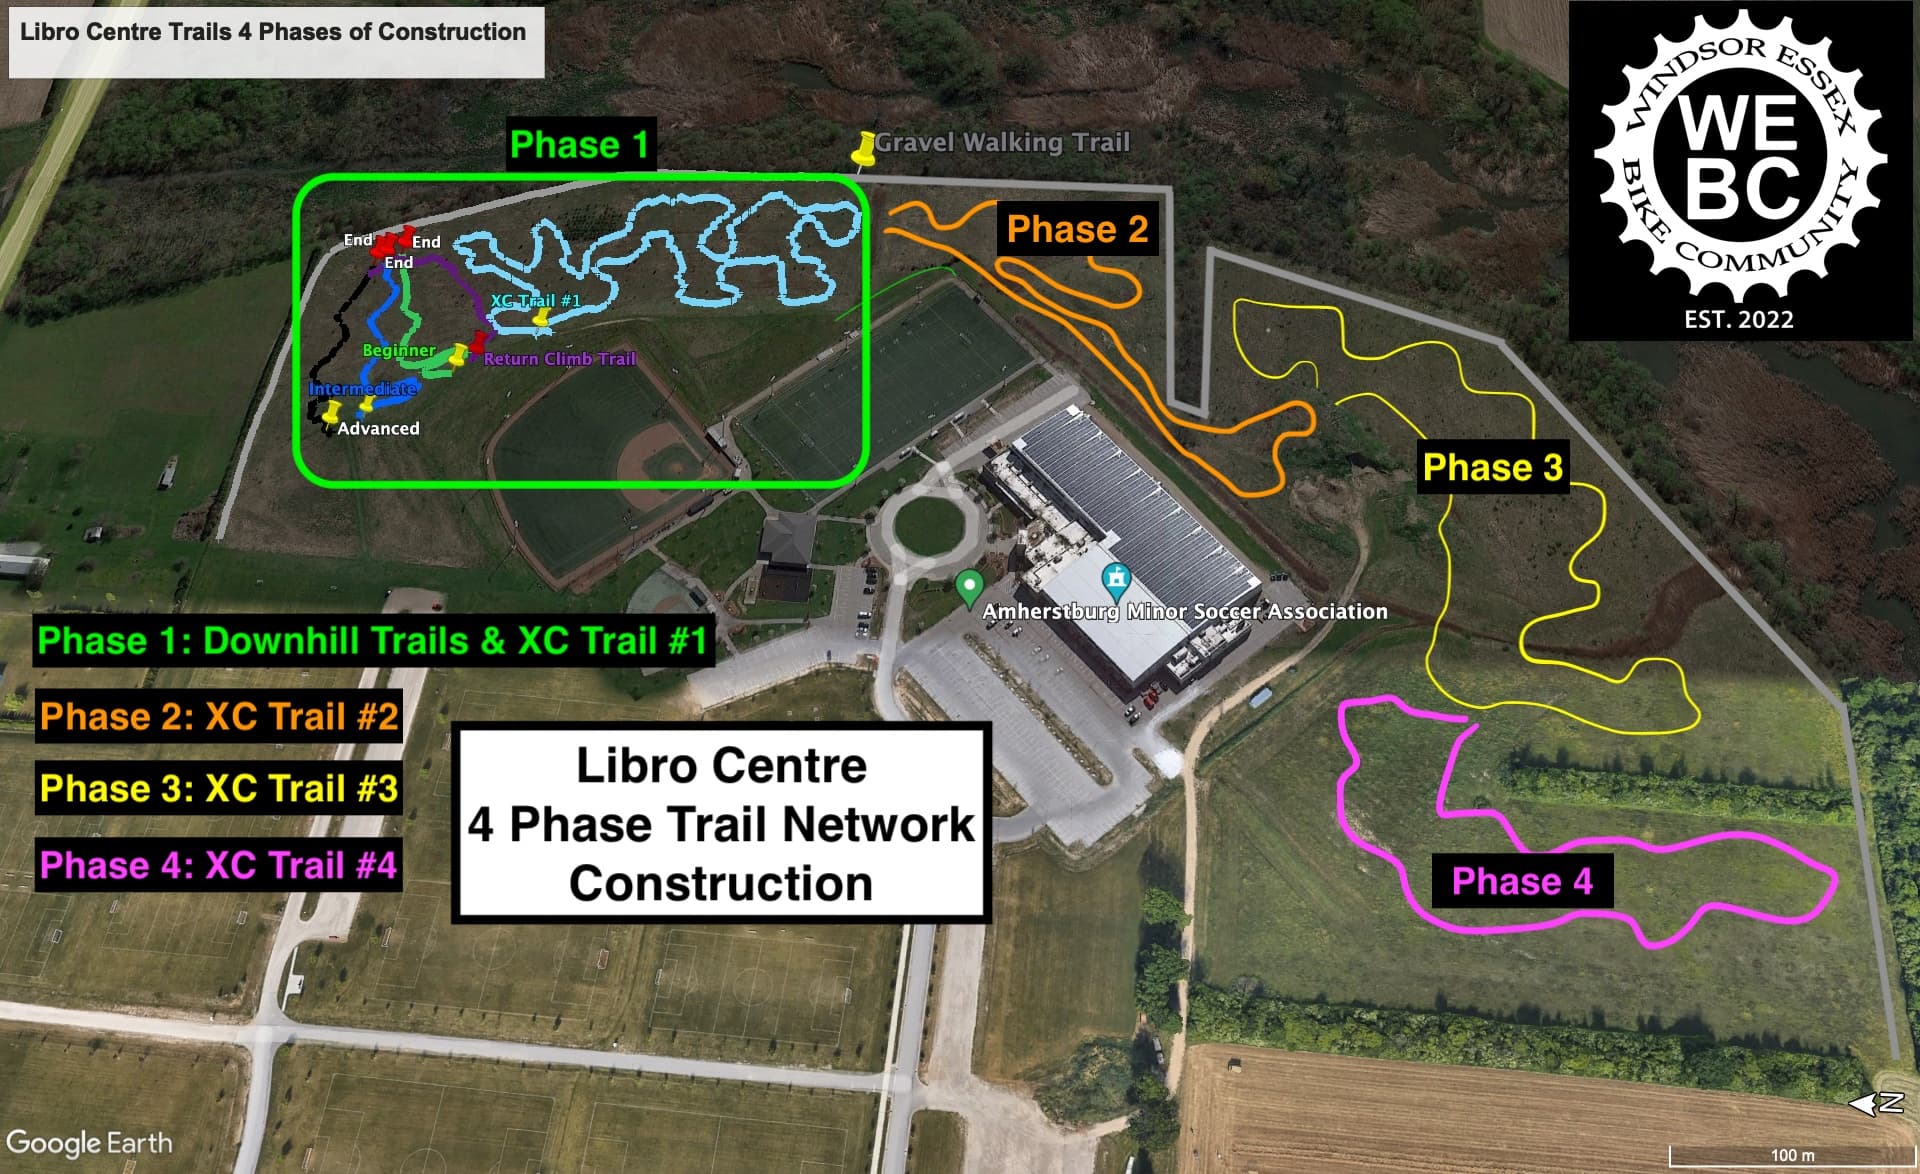 Libro Centre Trails' four phases of construction.